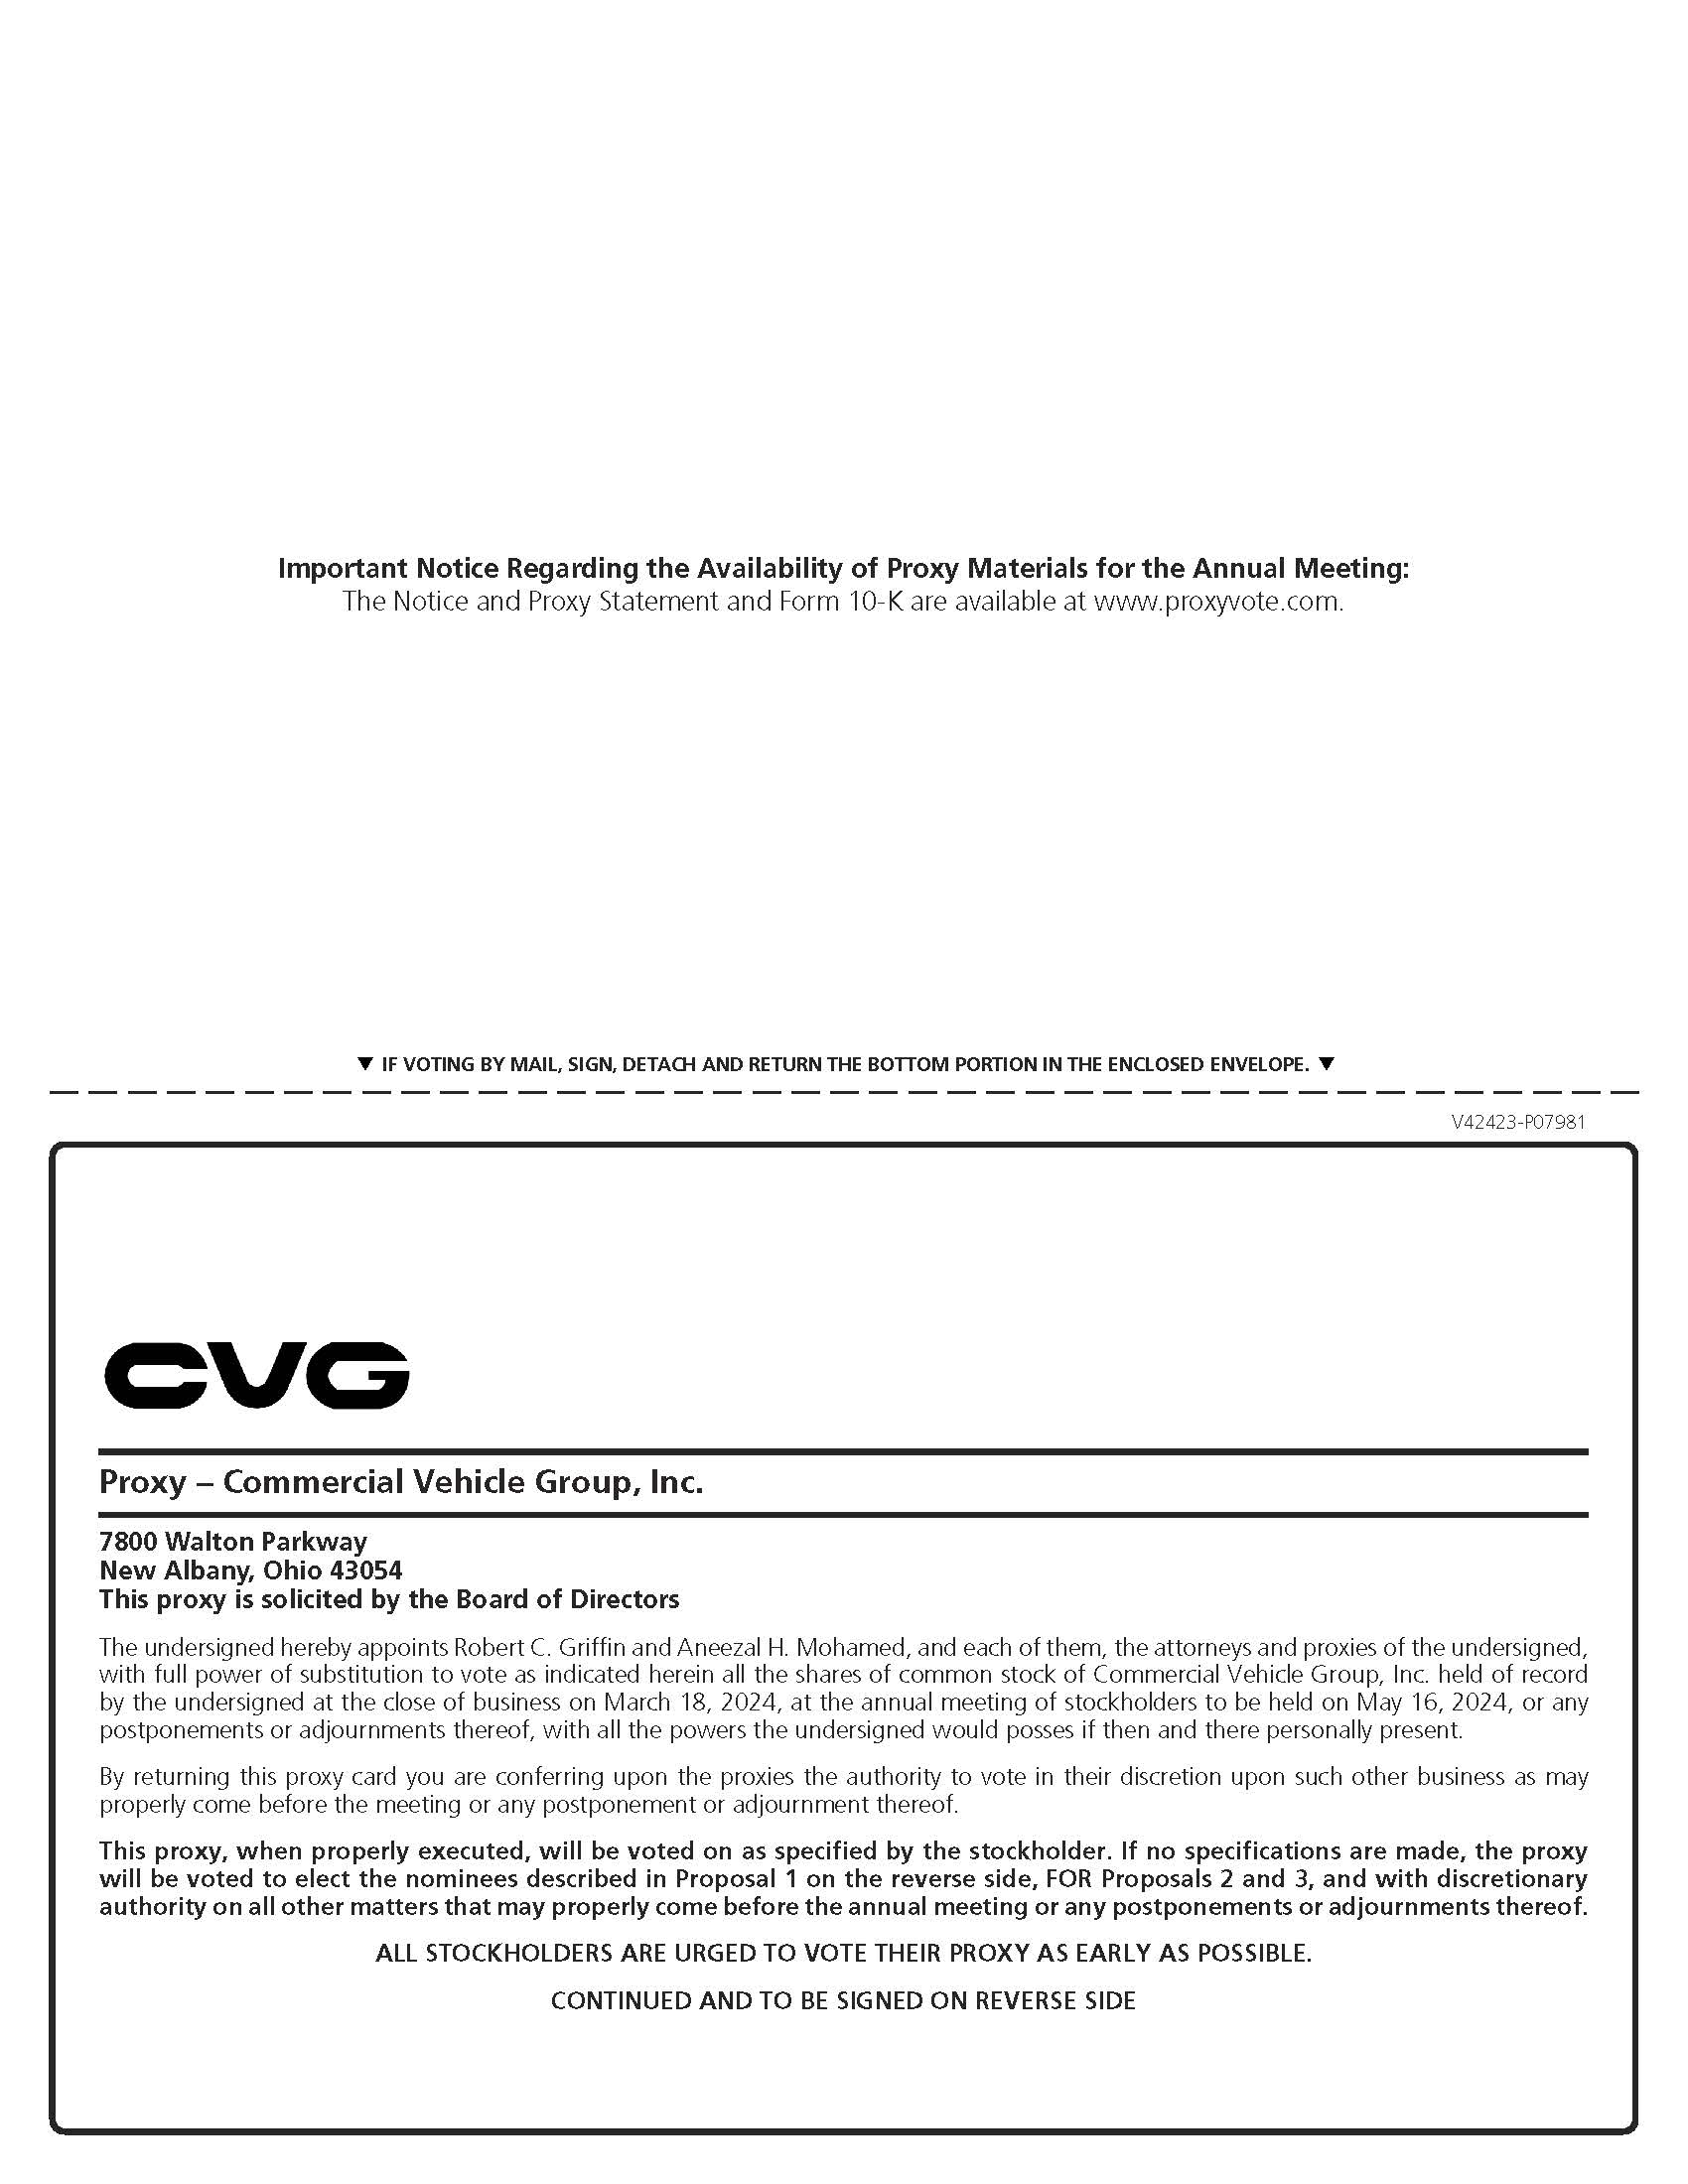 COMMERCIAL VEHICLE GROUP INC C1 Version 2 04.03.2024 FINAL APPROVED Version page 1.jpg